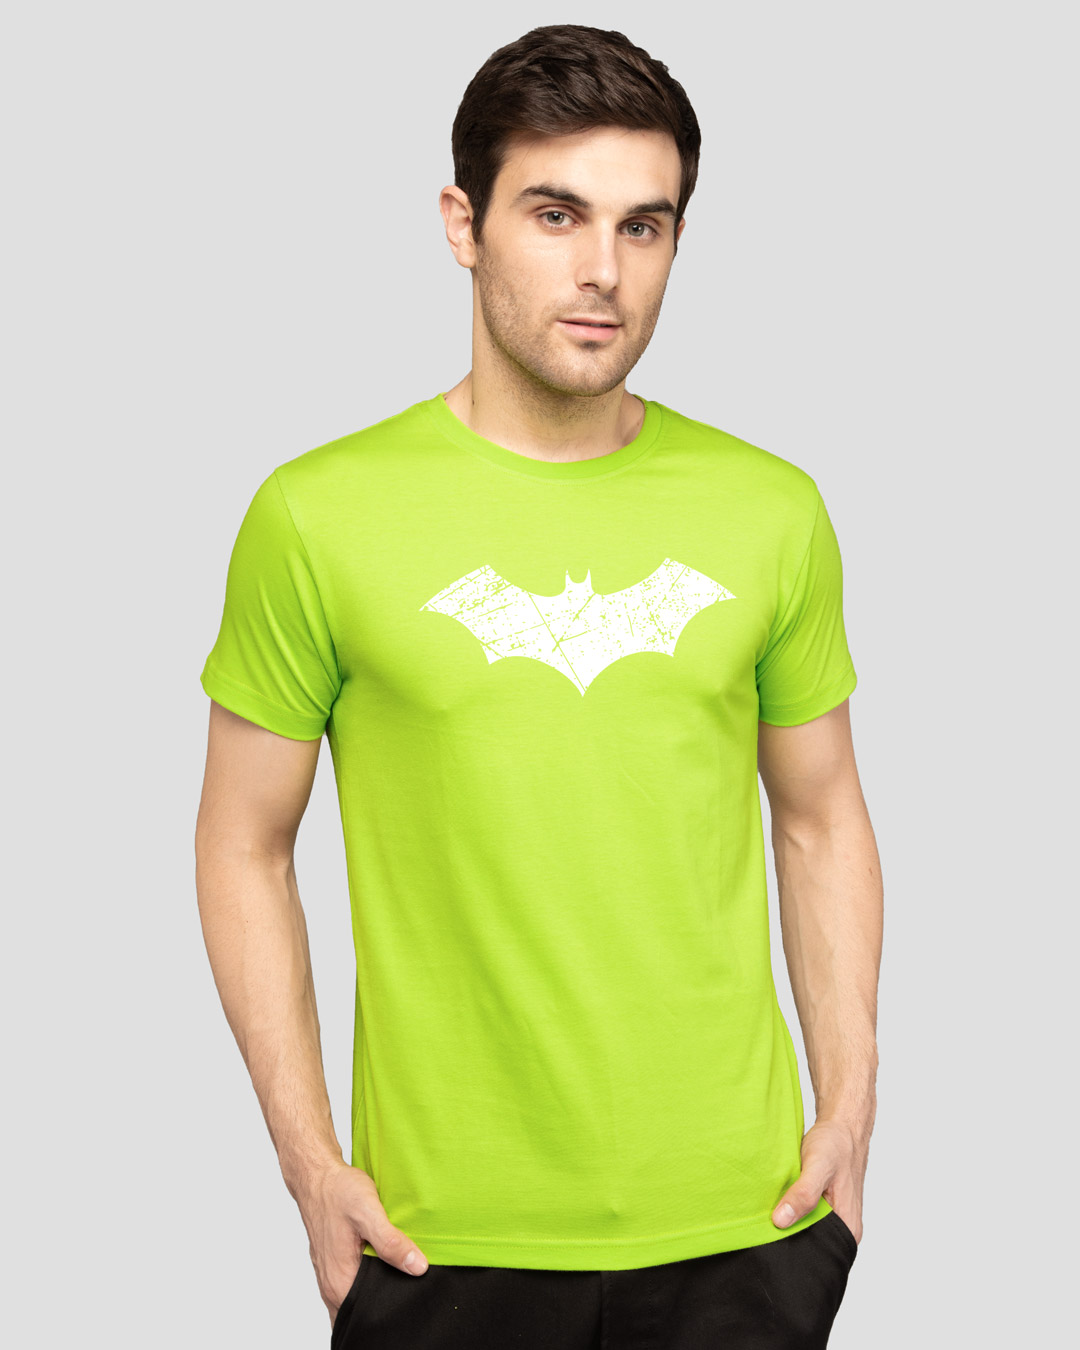 glowing t shirts online india